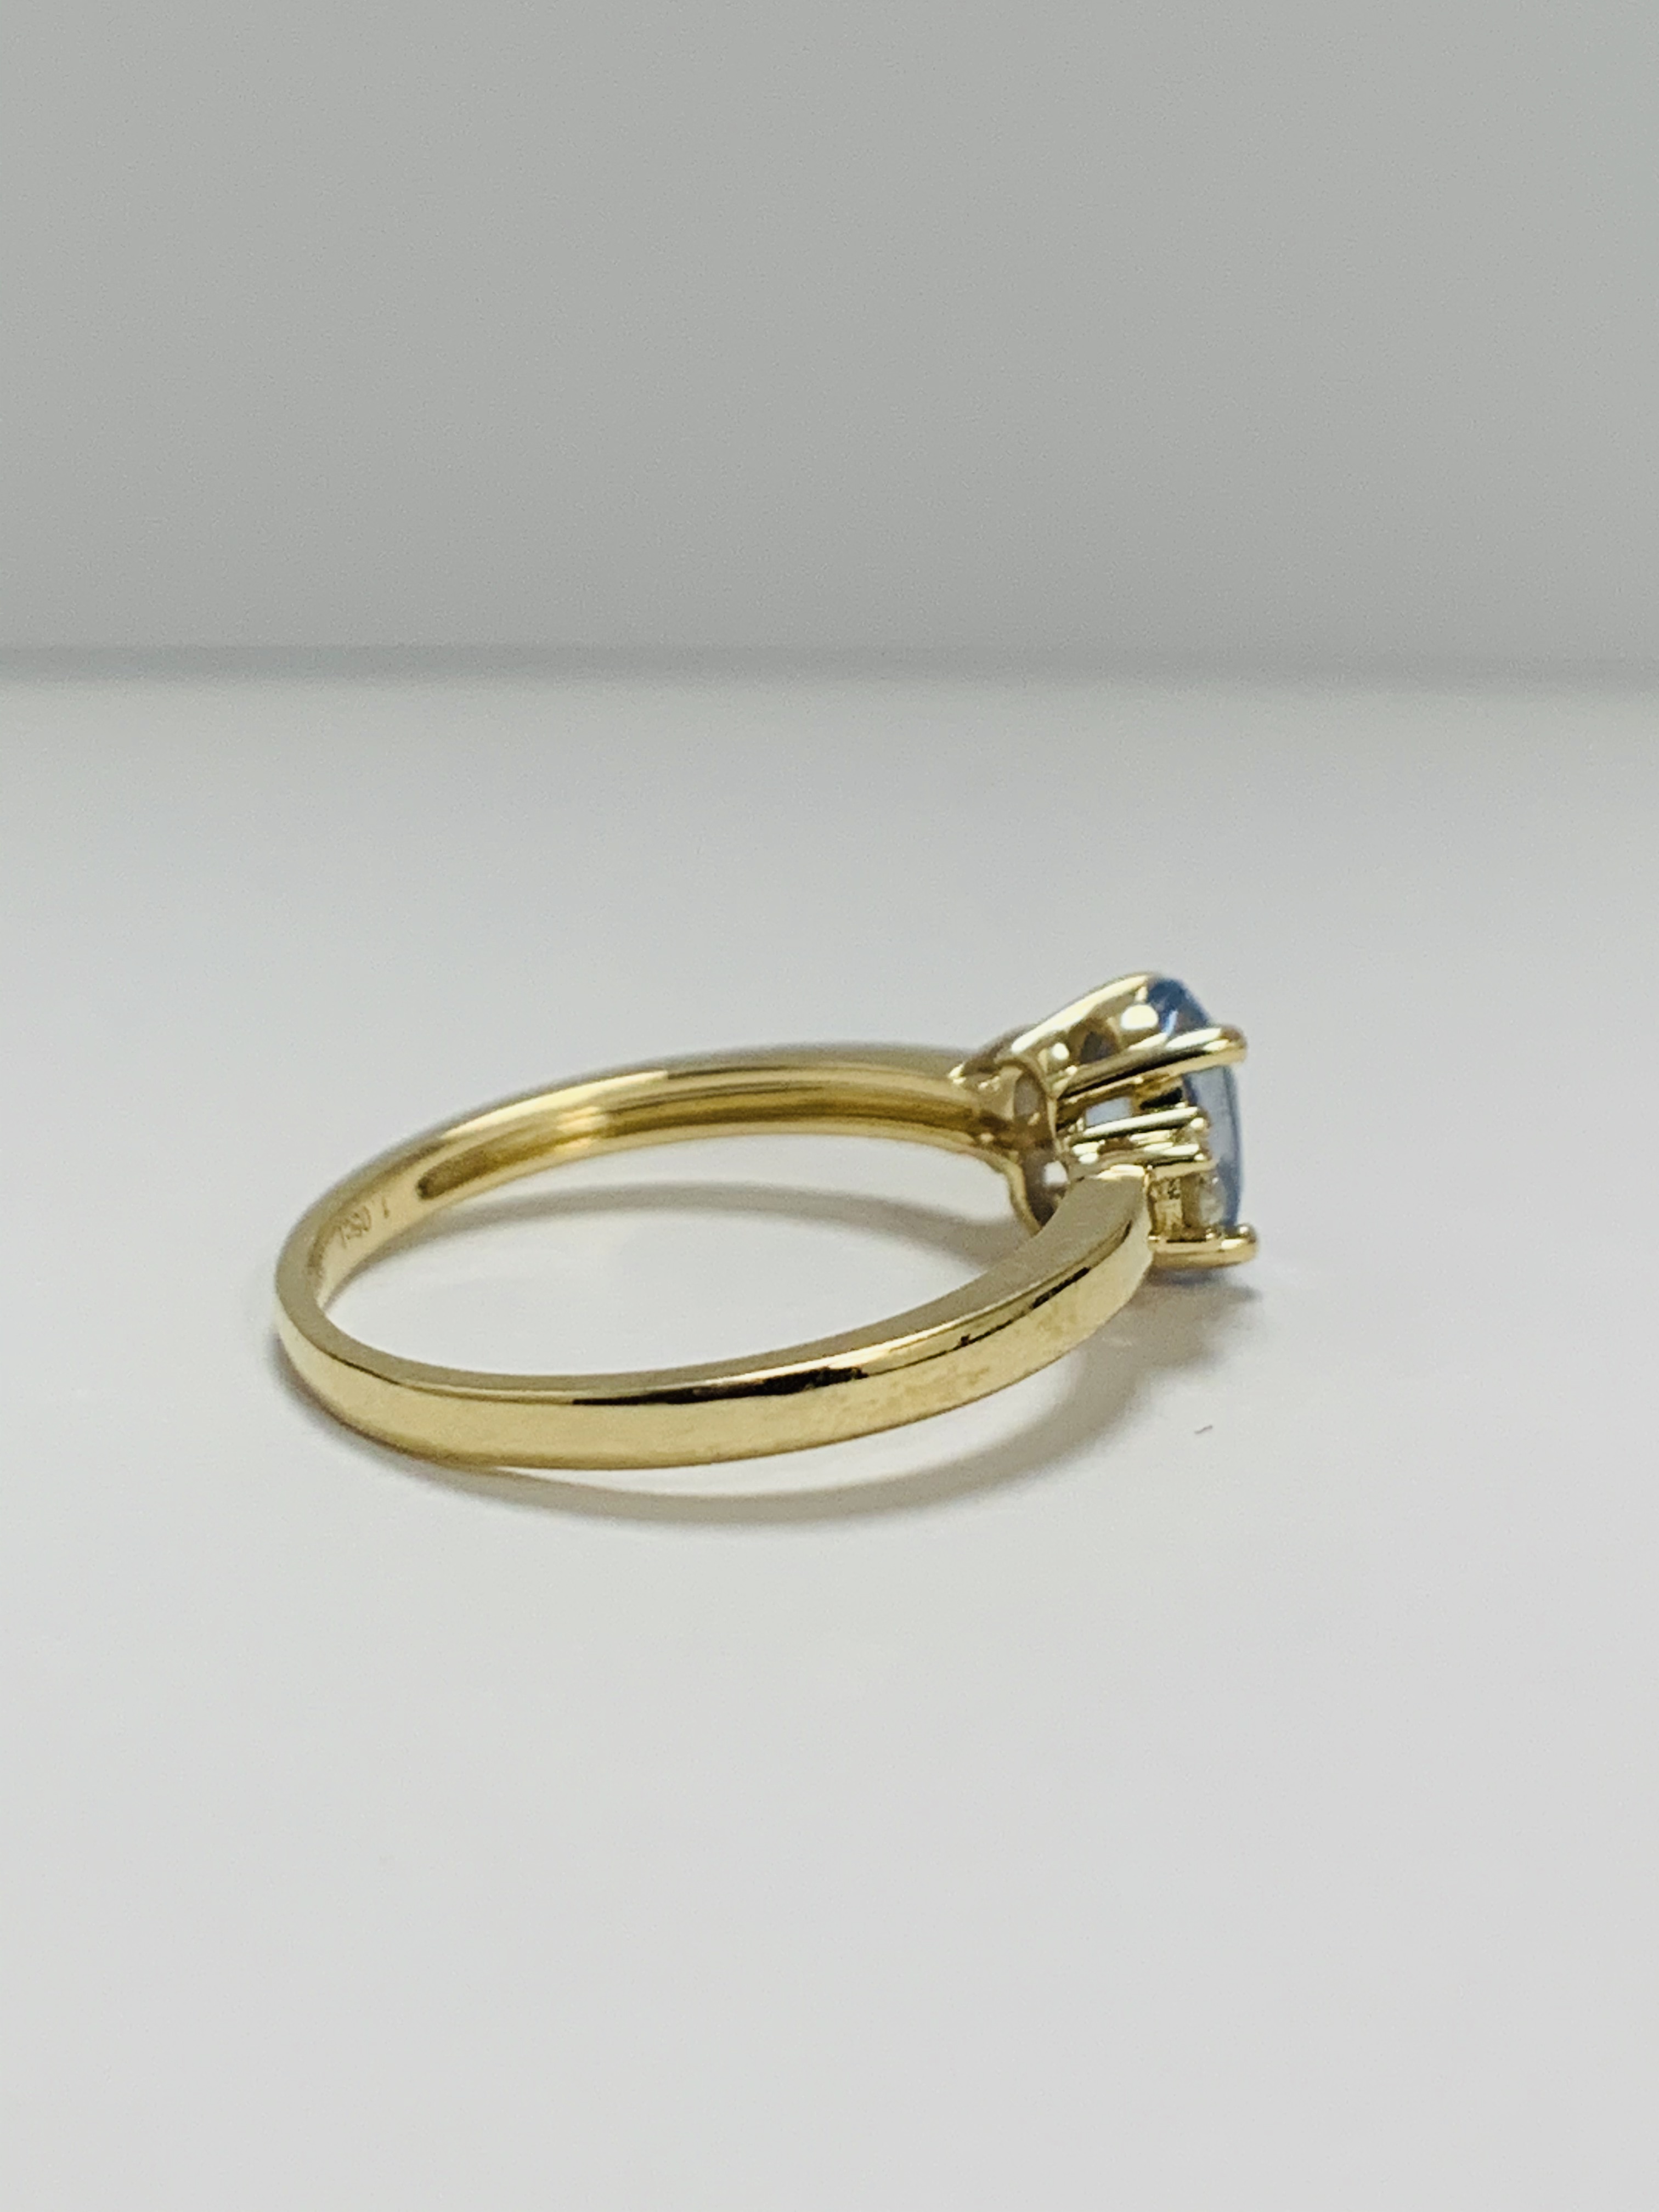 14ct Yellow Gold Sapphire and Diamond ring featuring centre, oval cut, medium blue Sapphire (1.05ct) - Image 4 of 9